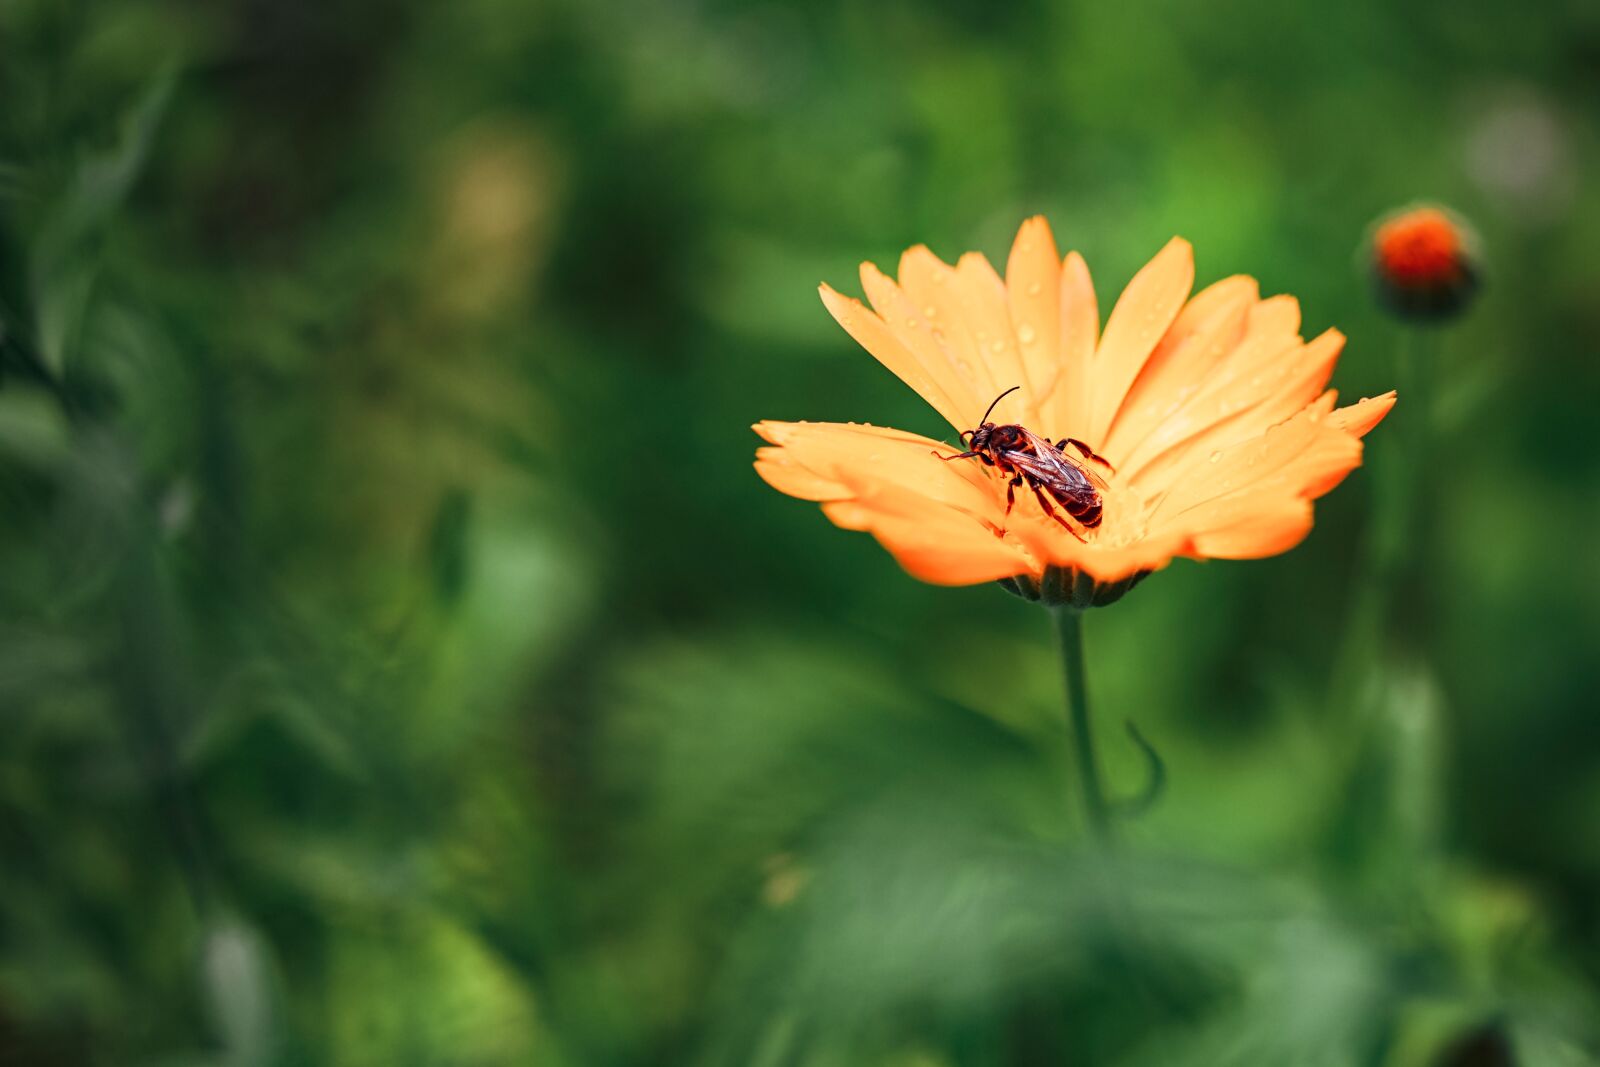 Nikon Z6 sample photo. Hoverfly, insect, pollination photography